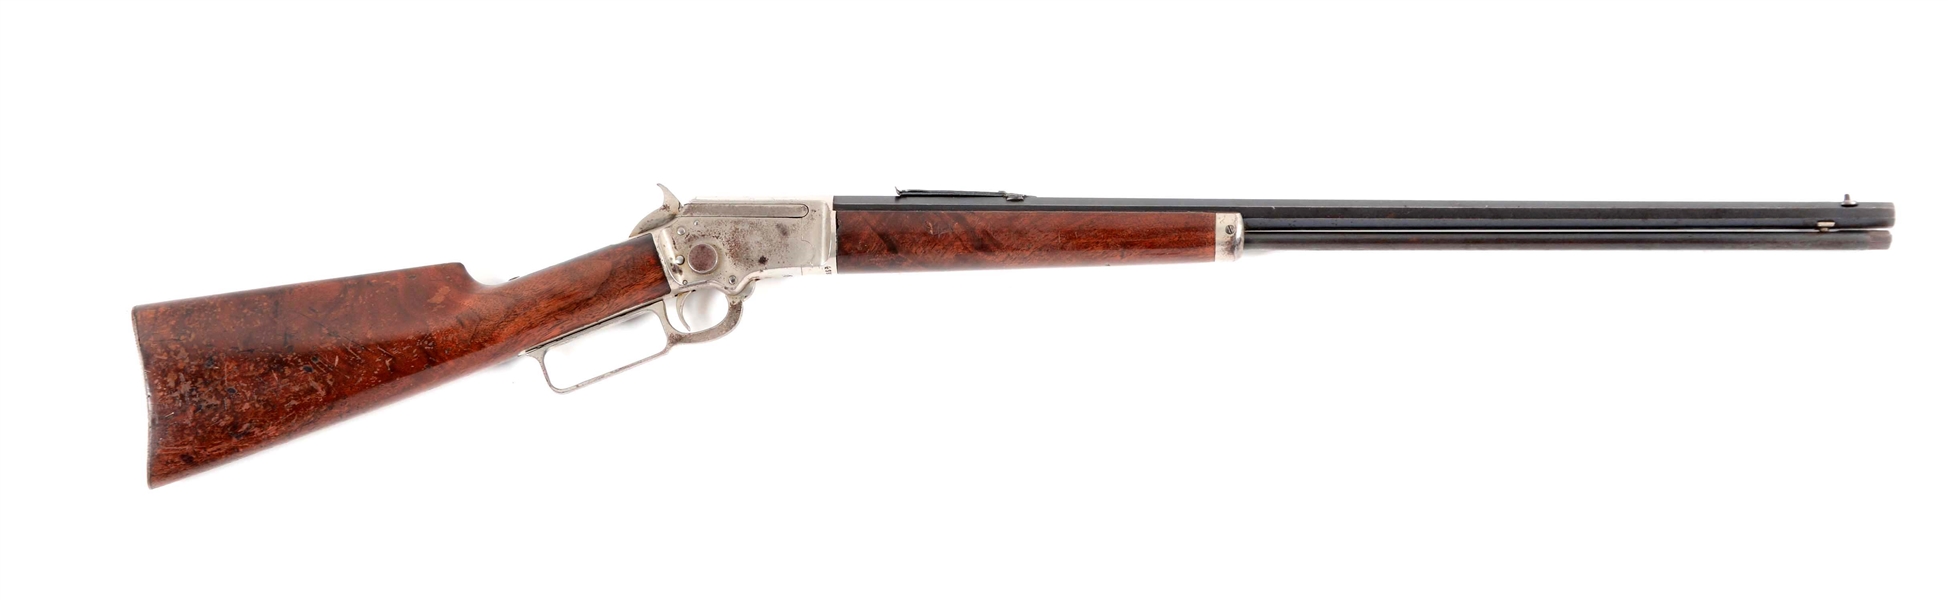 (C) MARLIN MODEL 1897 LEVER ACTION RIFLE.